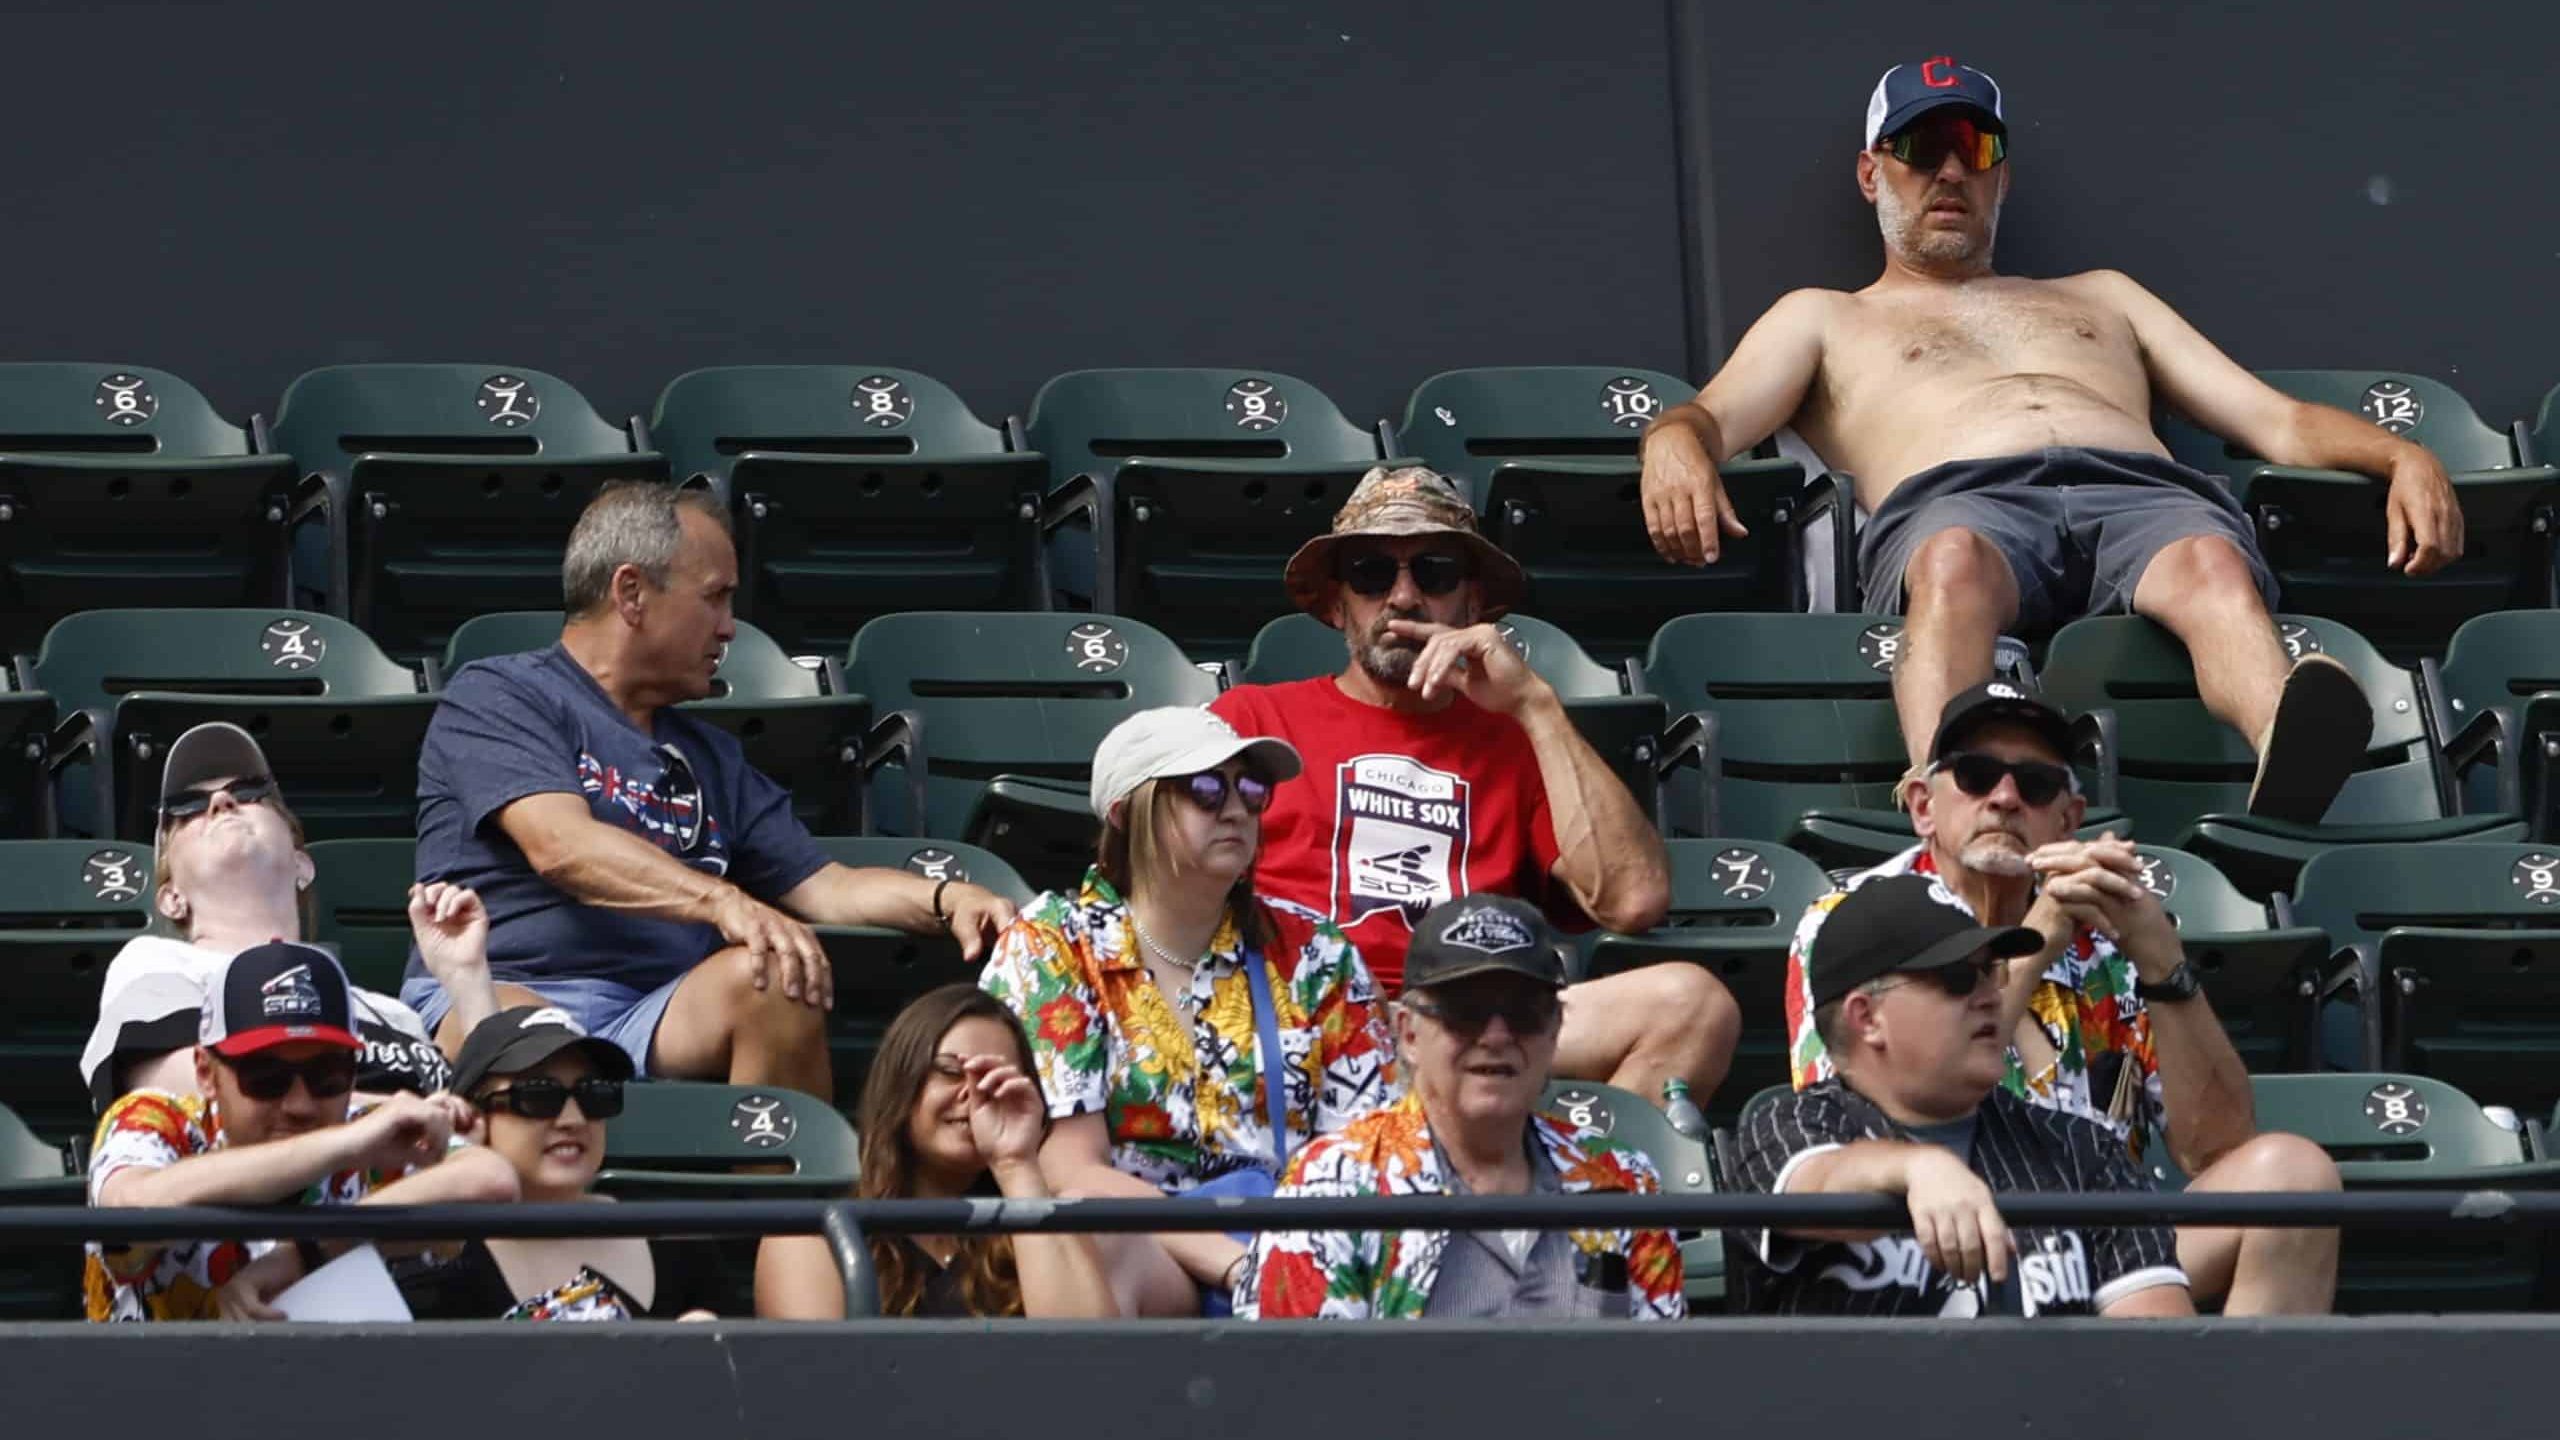 White Sox see largest attendance decrease in Major League Baseball